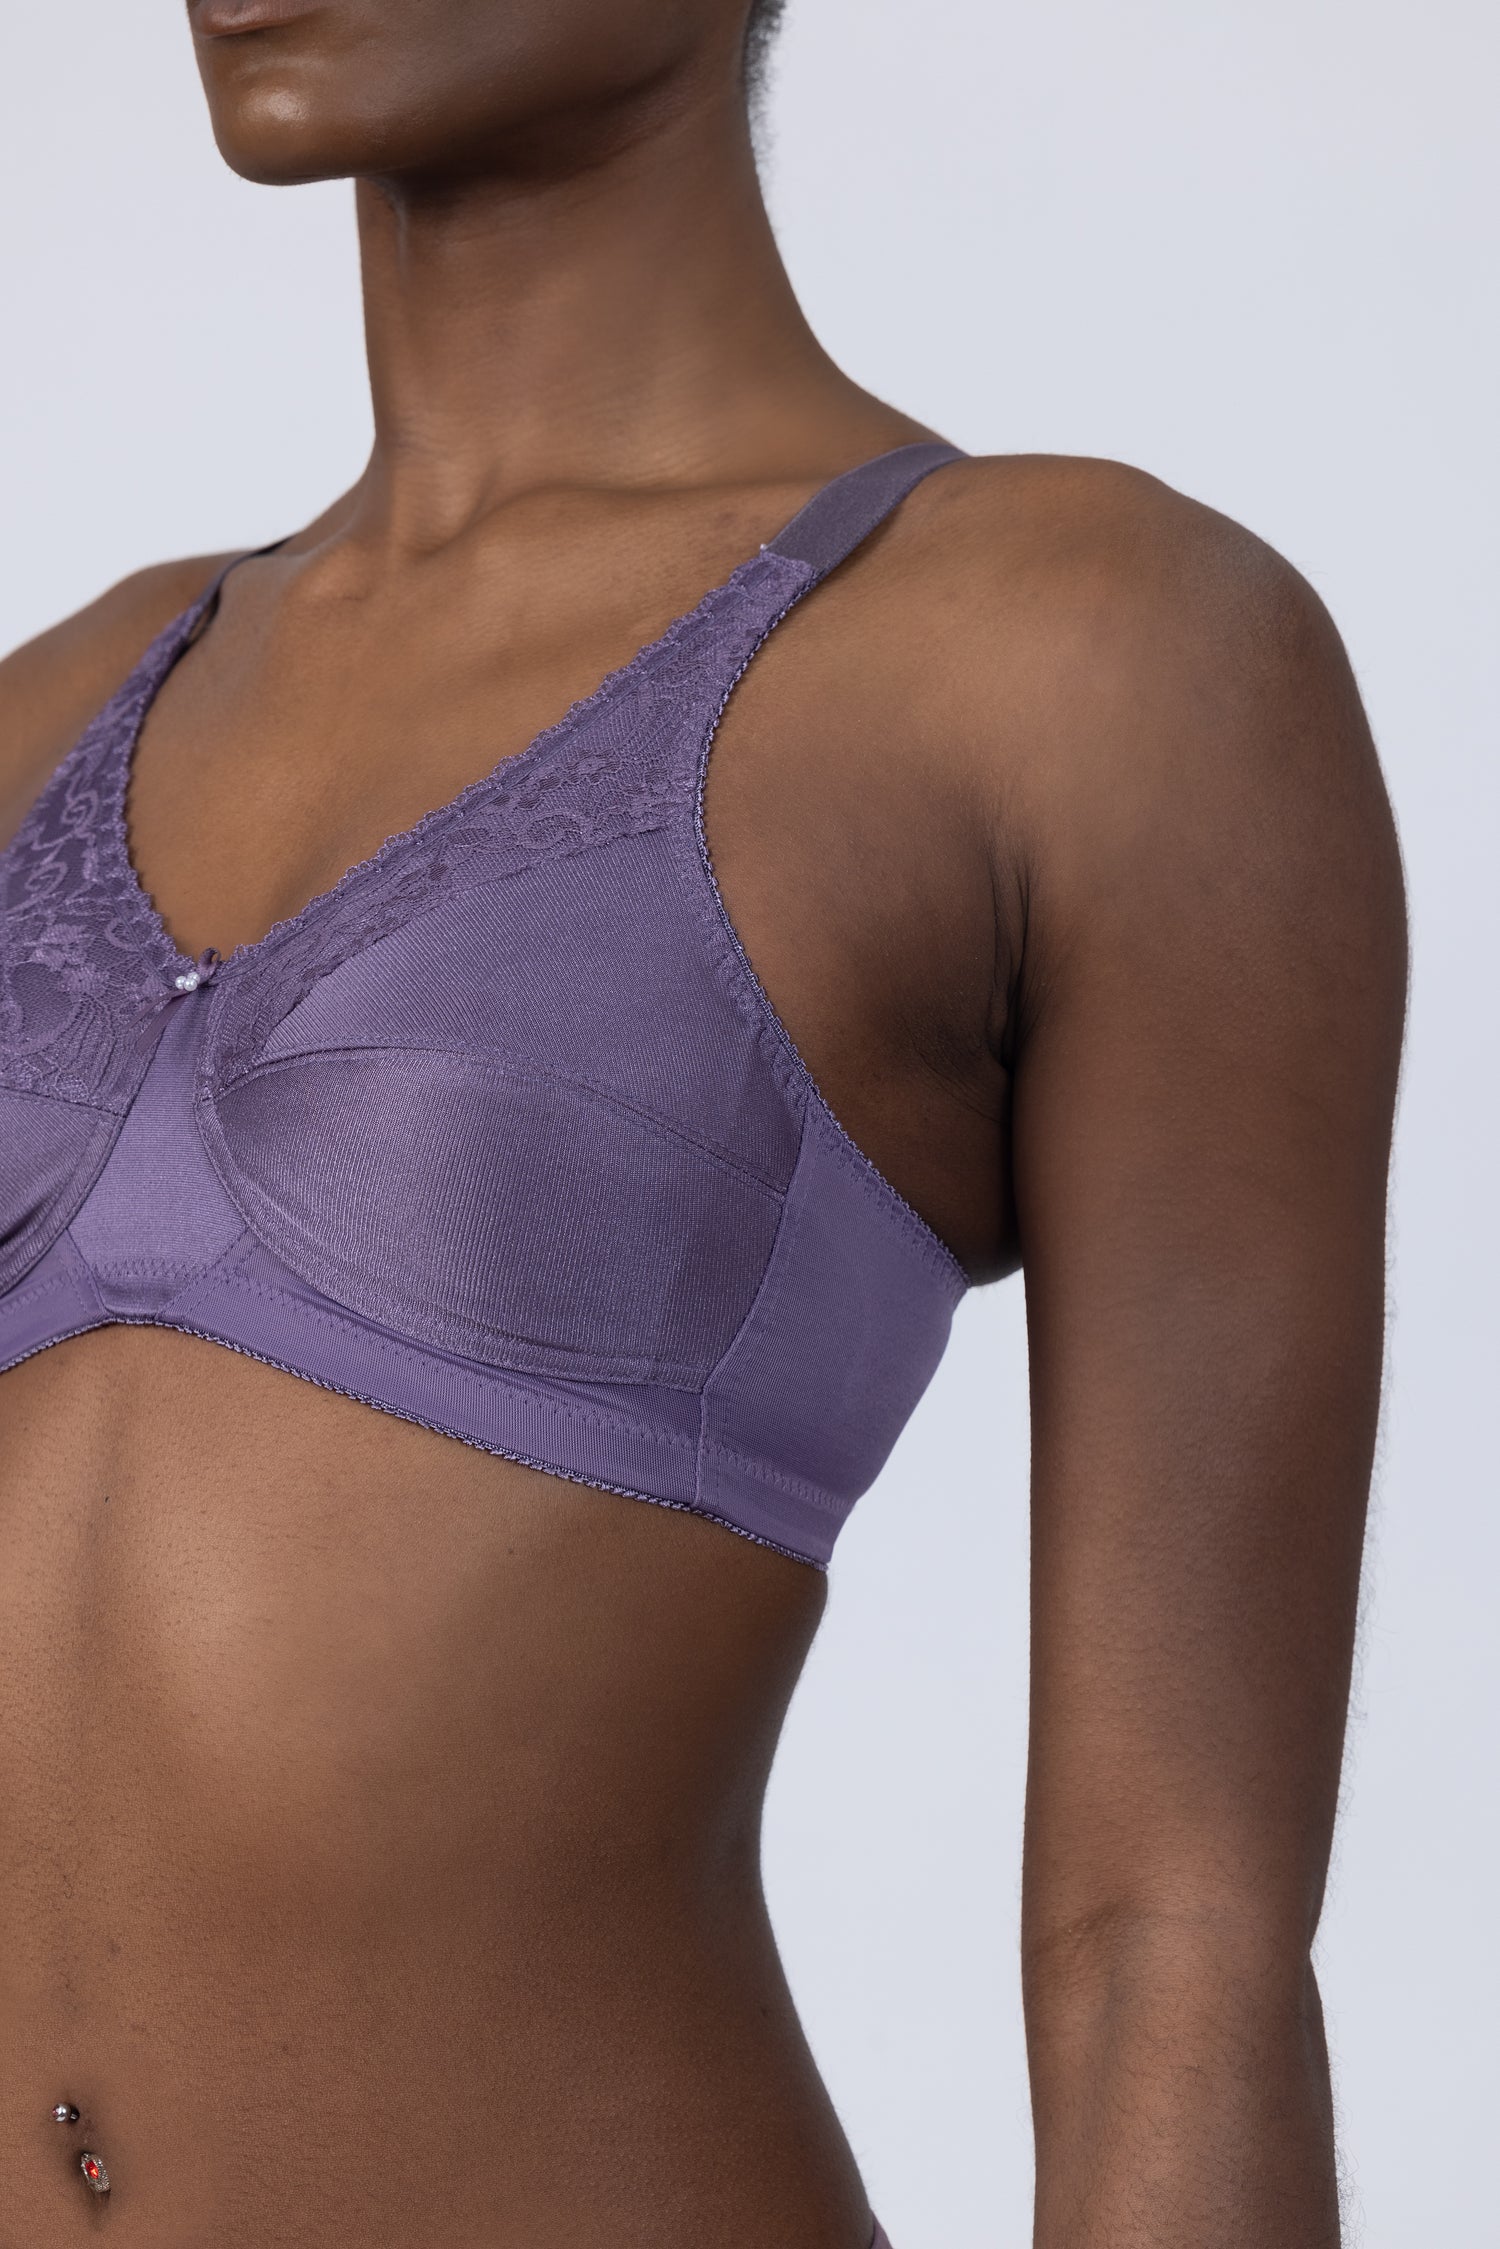 Looking for high-quality mastectomy bras suitable for active lifestyles?